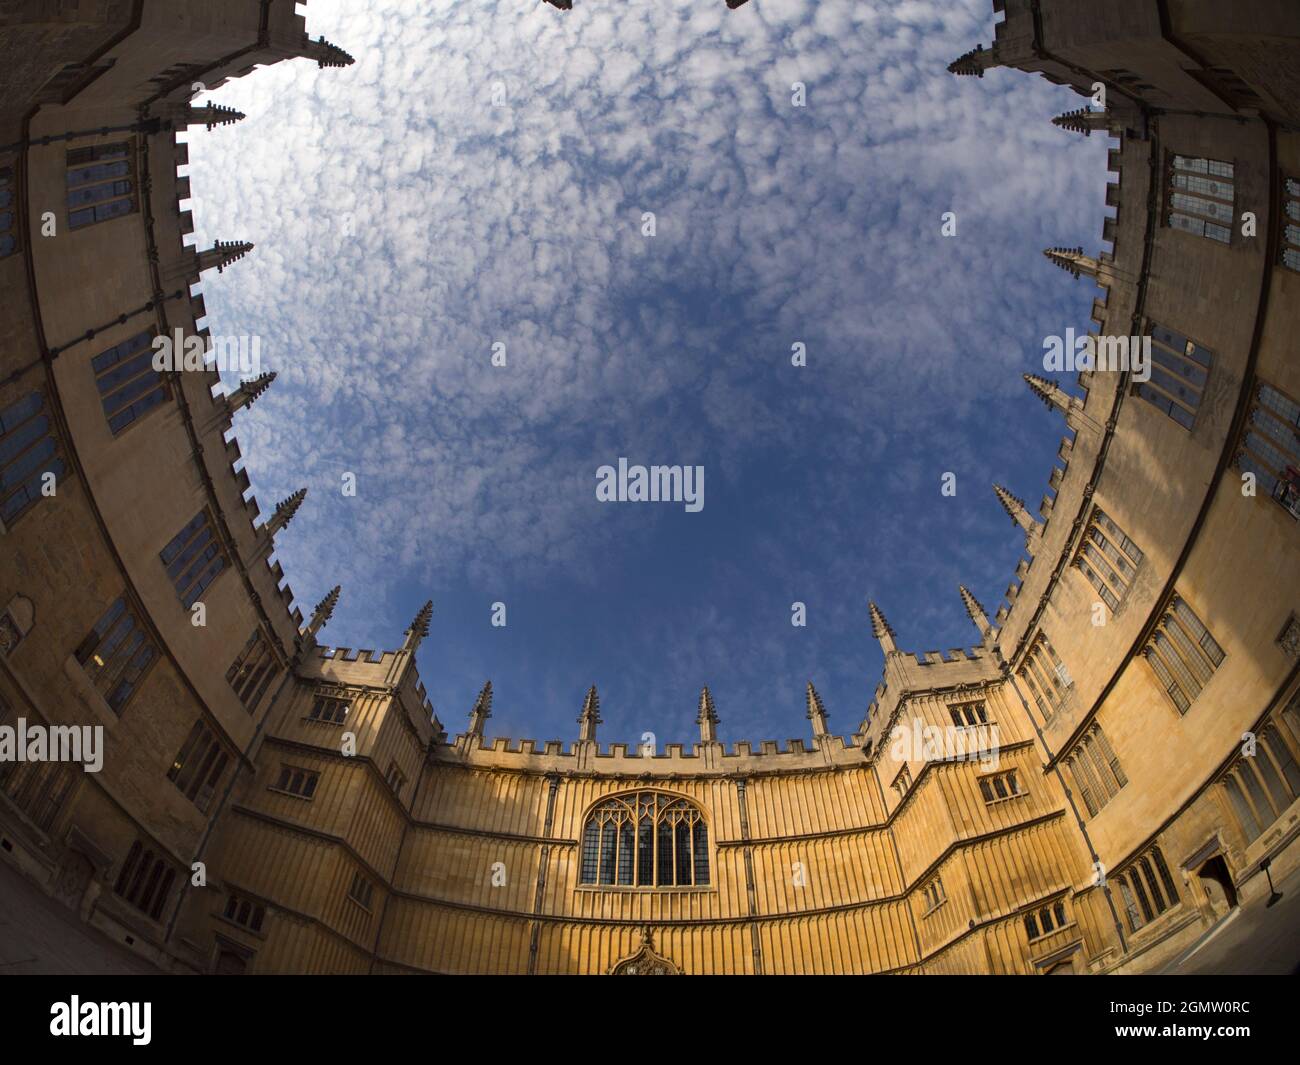 Oxford, England - 6 February 2020  Here we see one of the most famous buildings in the heart of Oxford-  the world famous Bodleian Library of the Univ Stock Photo